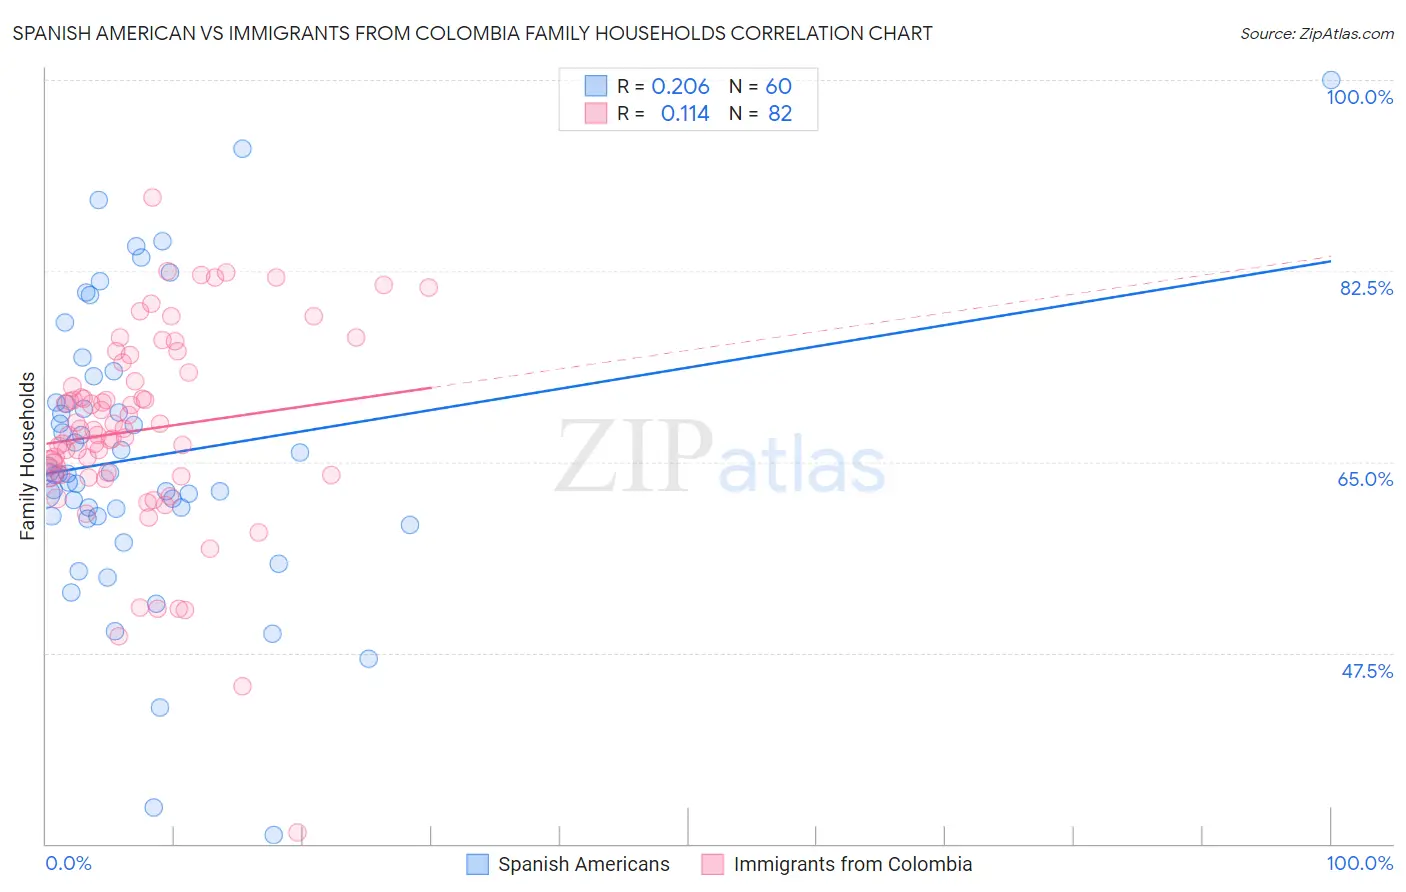 Spanish American vs Immigrants from Colombia Family Households